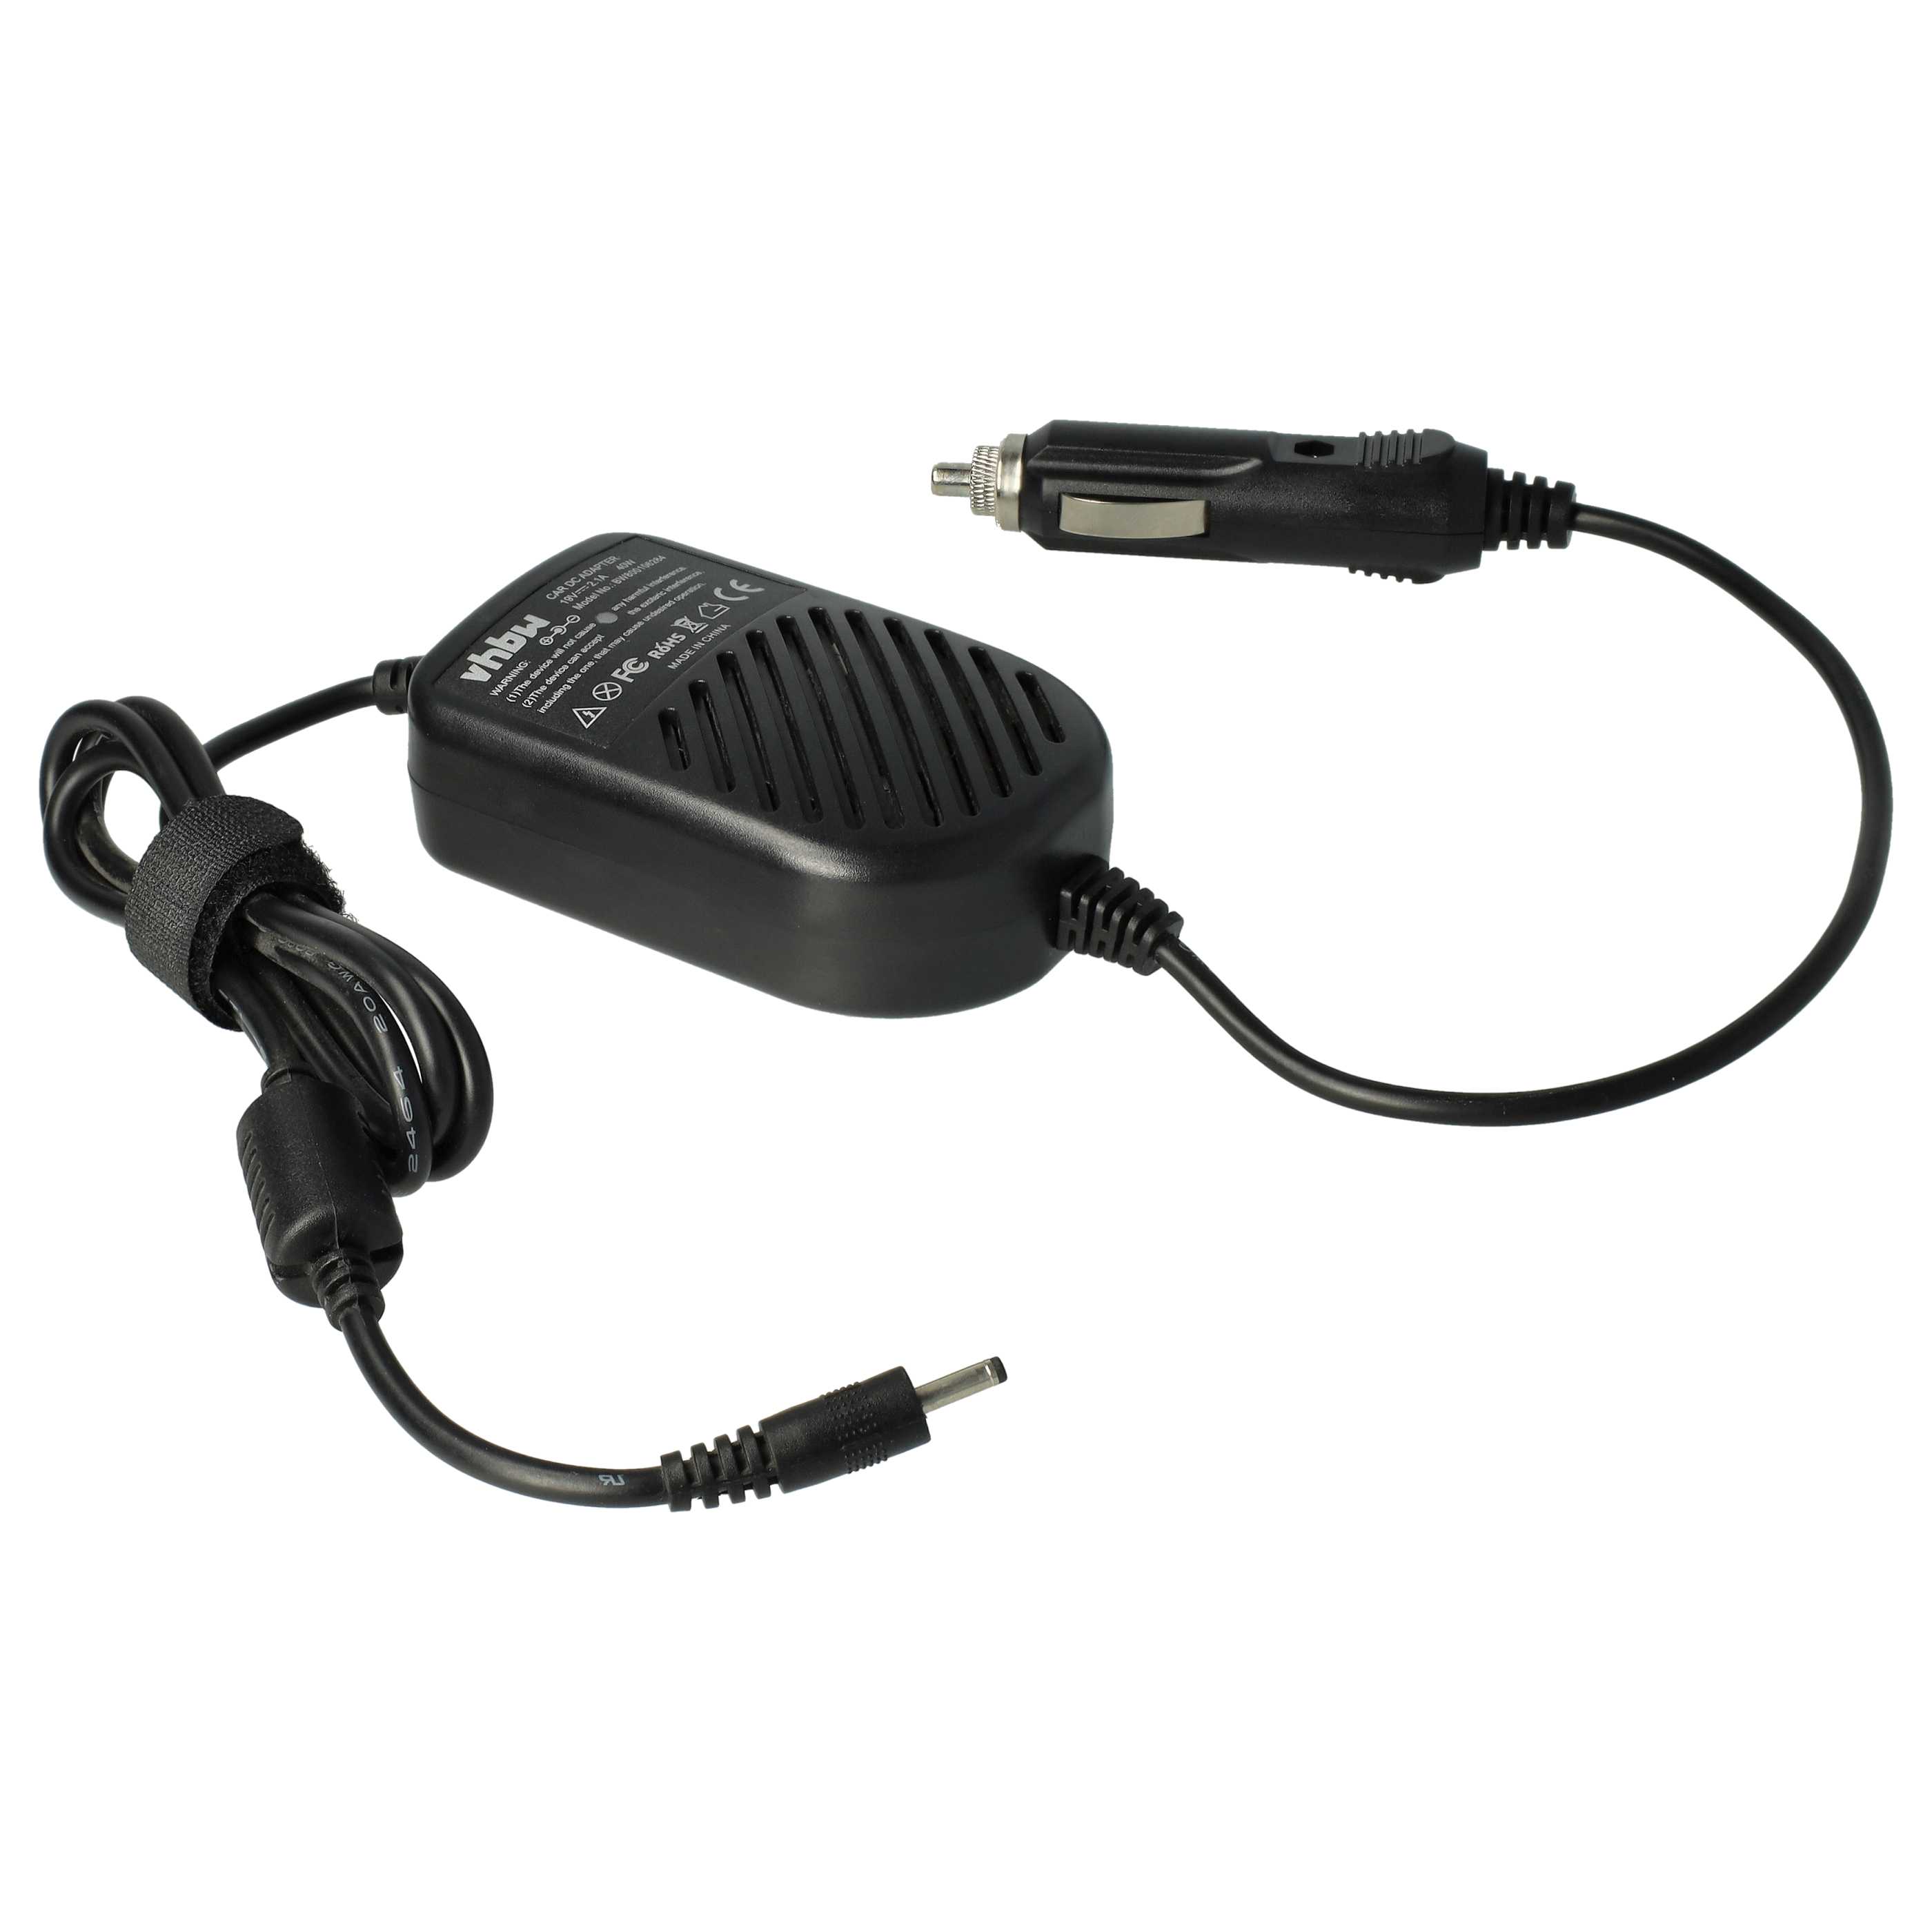 Vehicle Charger replaces Samsung AA-PA2N40L, AA-PA3NS40/US, AA-PA2N40S, AD-4019P, AD-4019 for Notebook - 2.1 A